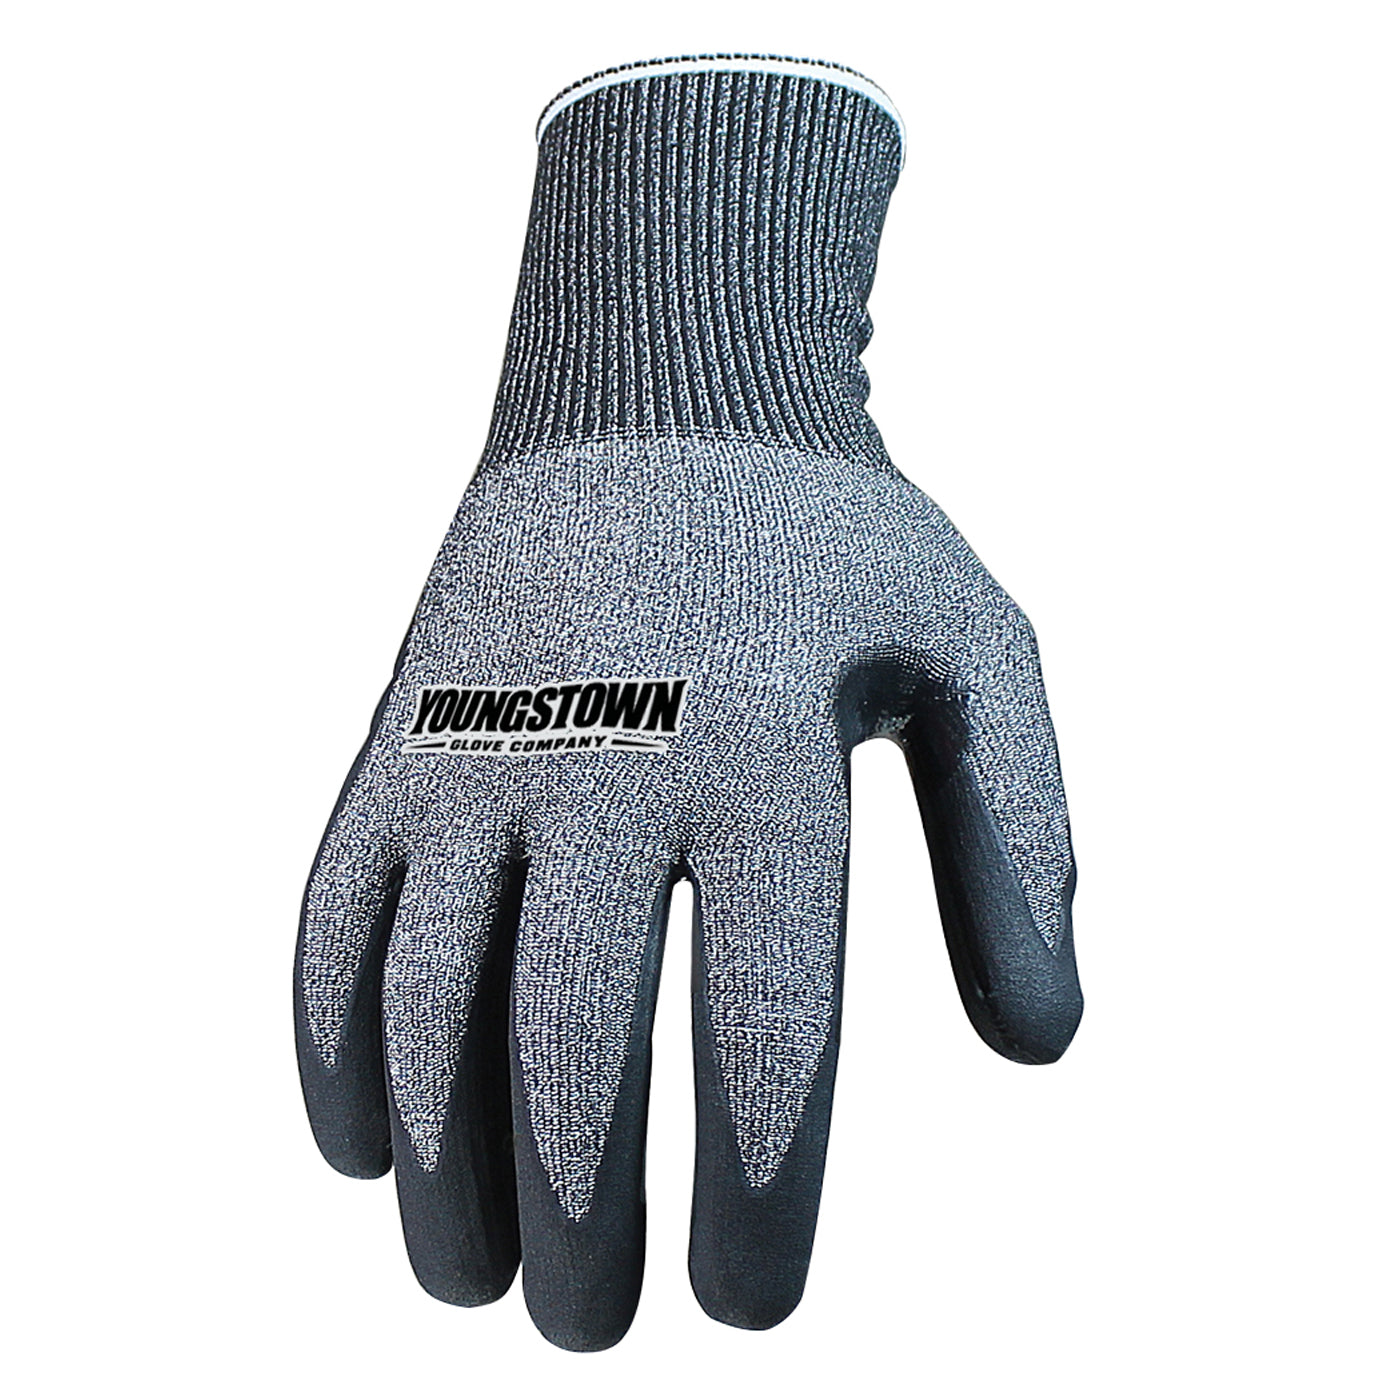 12-3900-15 Youngstown CRD-15 Glove - Main image